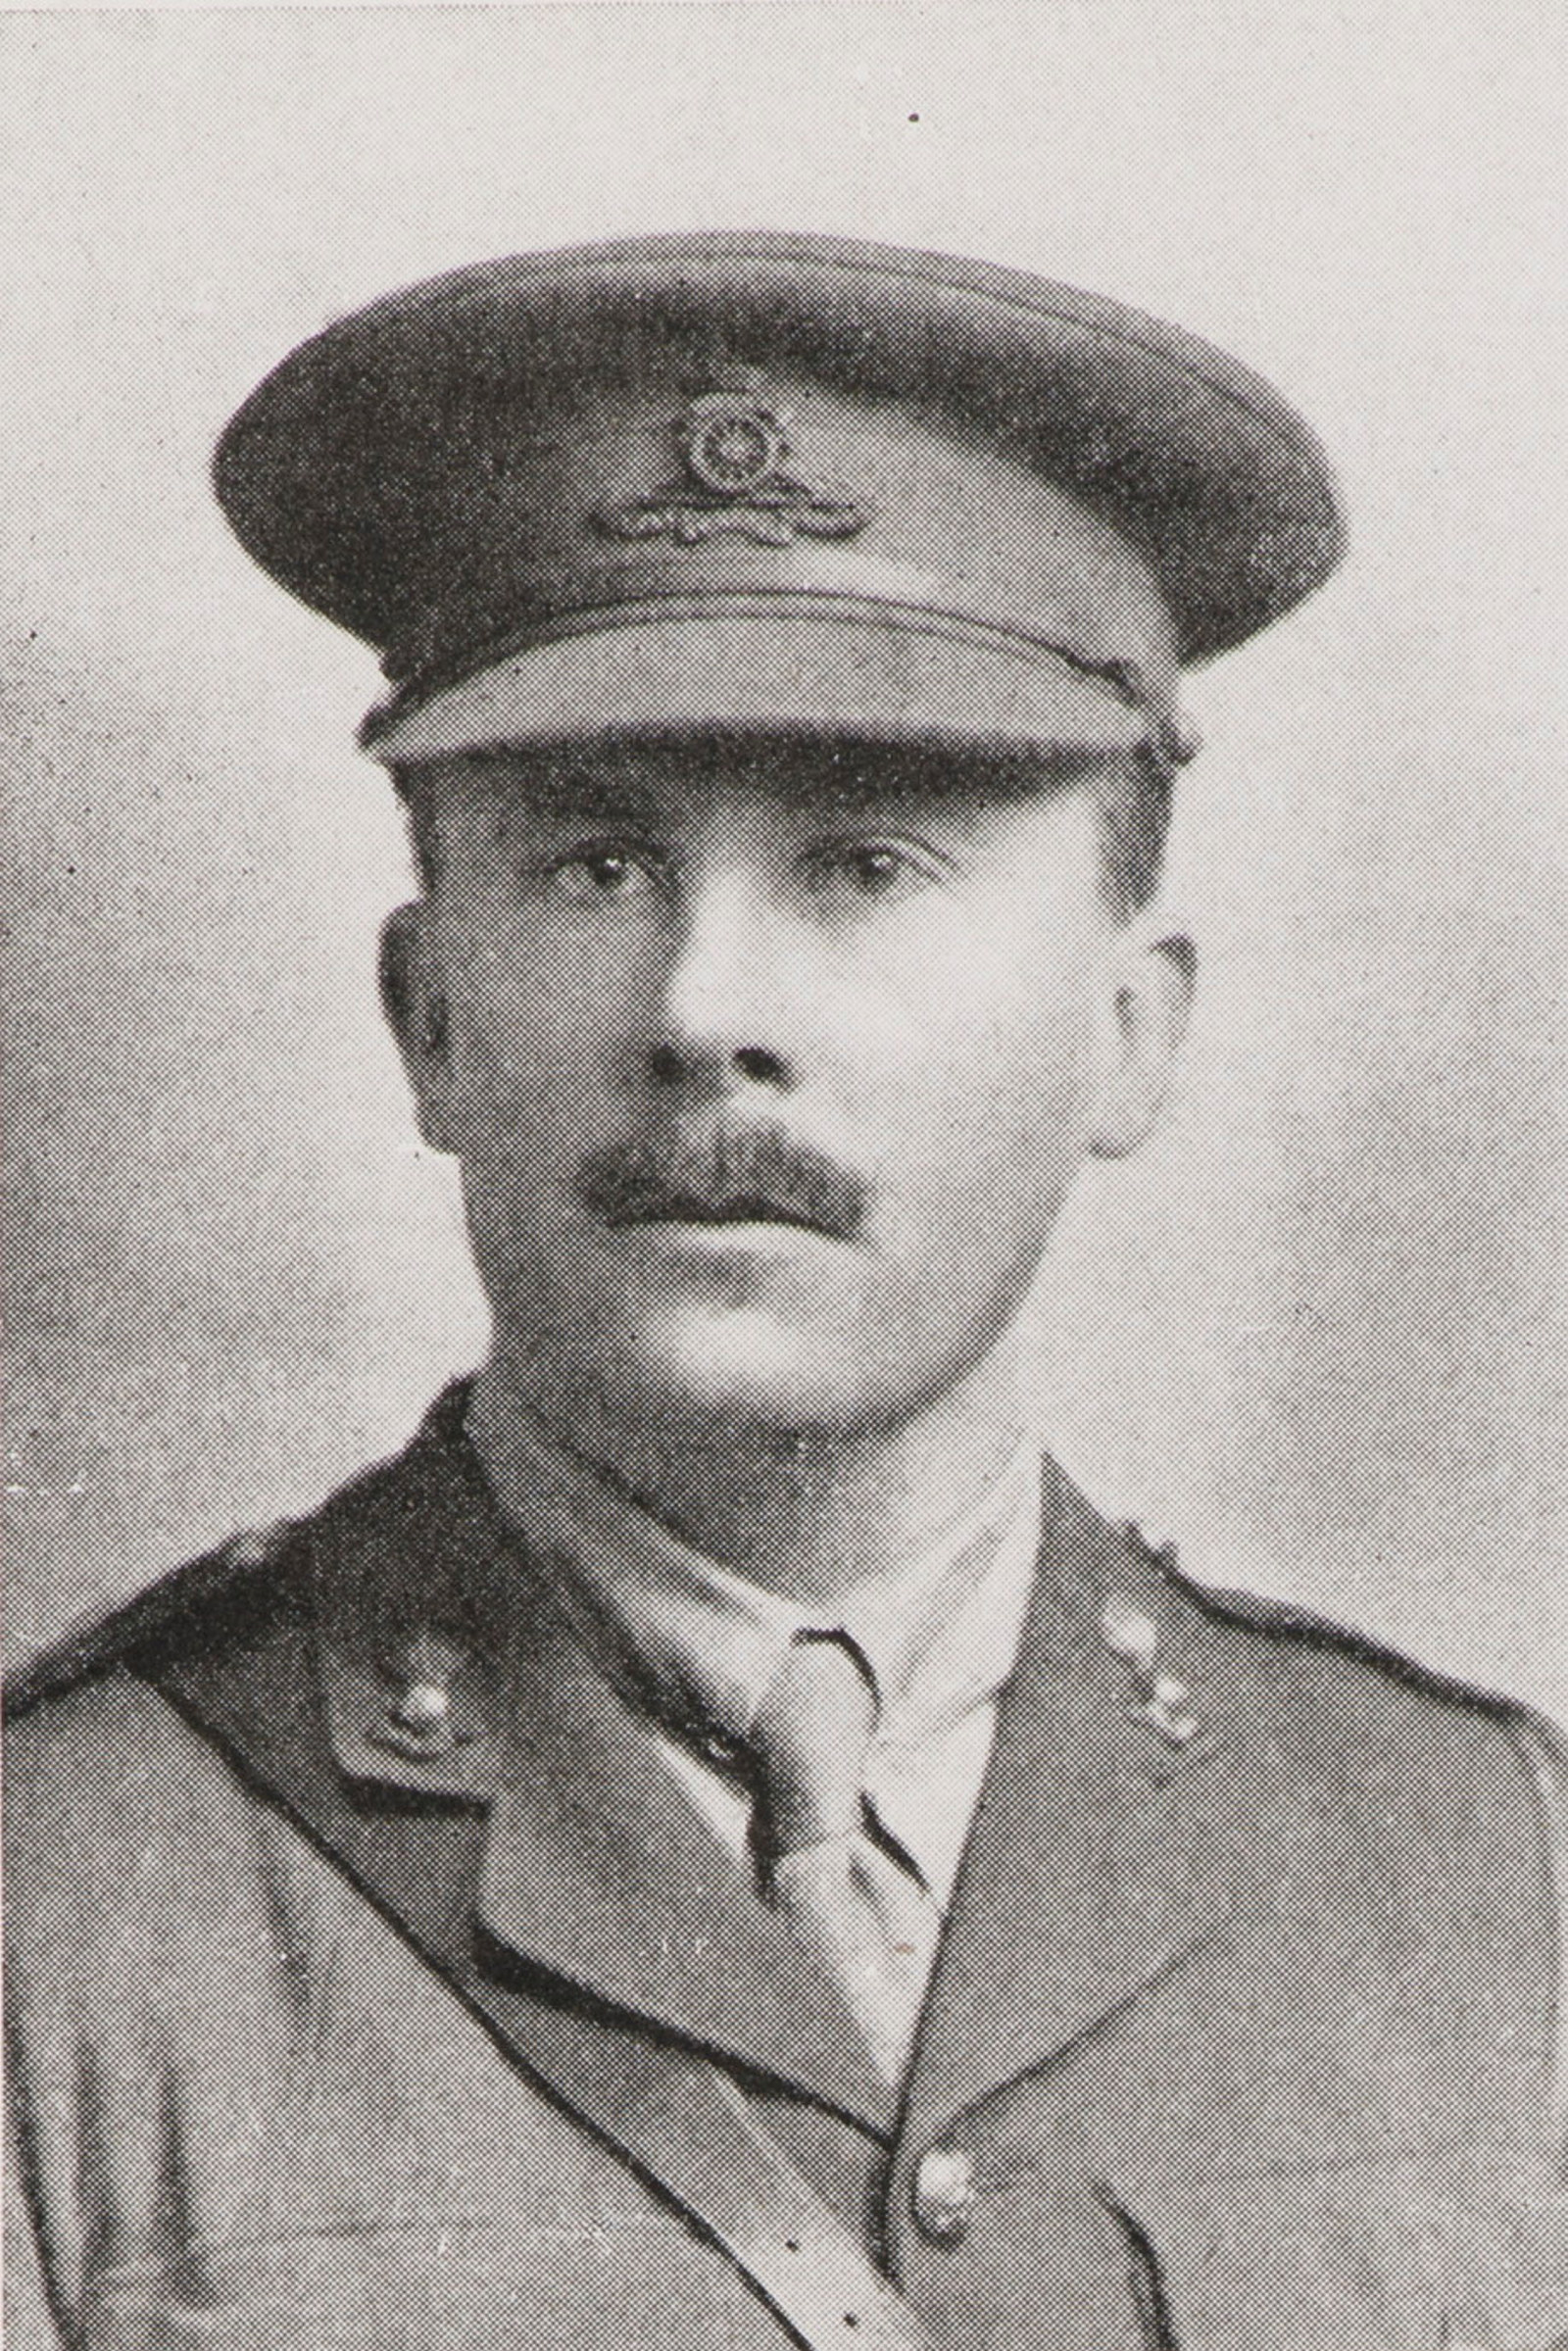 Black and white portrait of man in uniform with moustache.